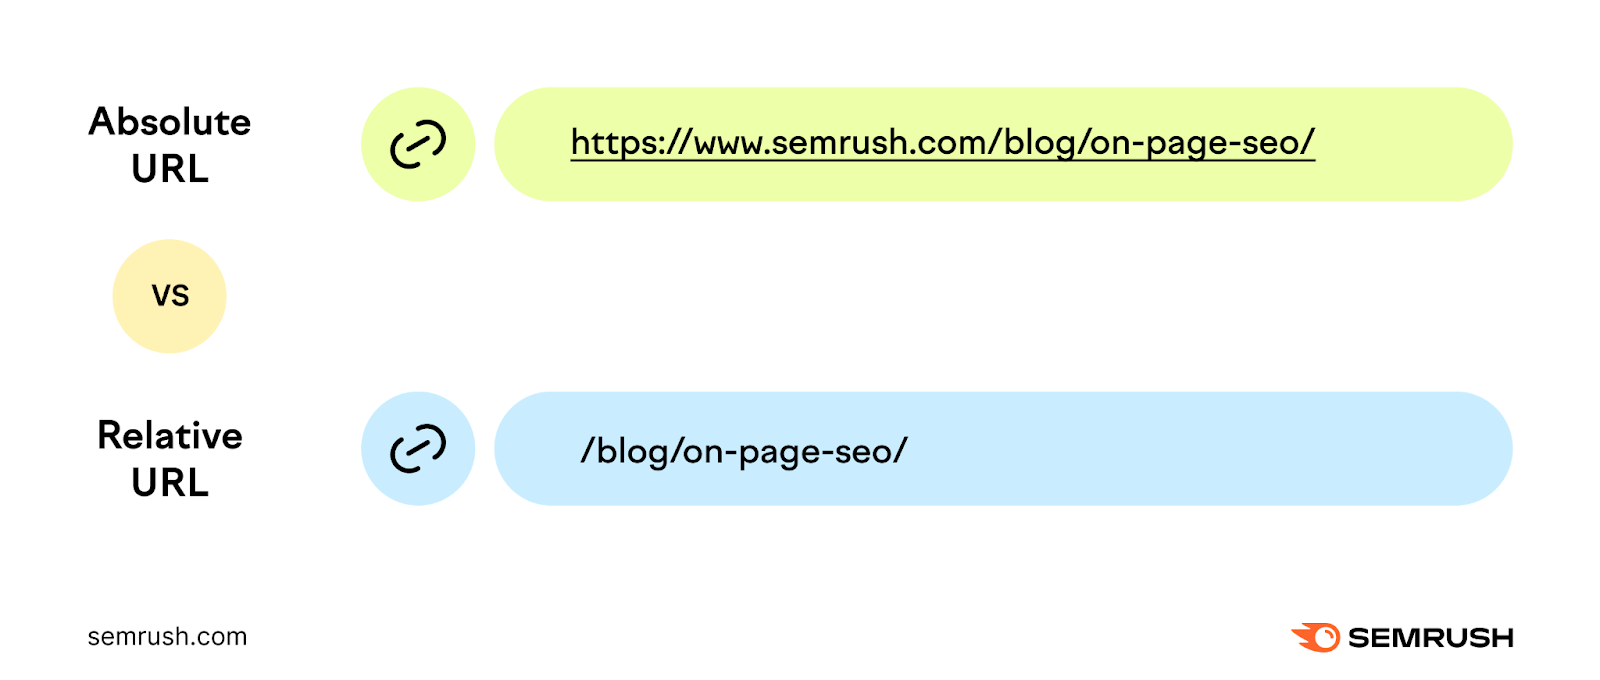 An example of an absolute URL and relative URL